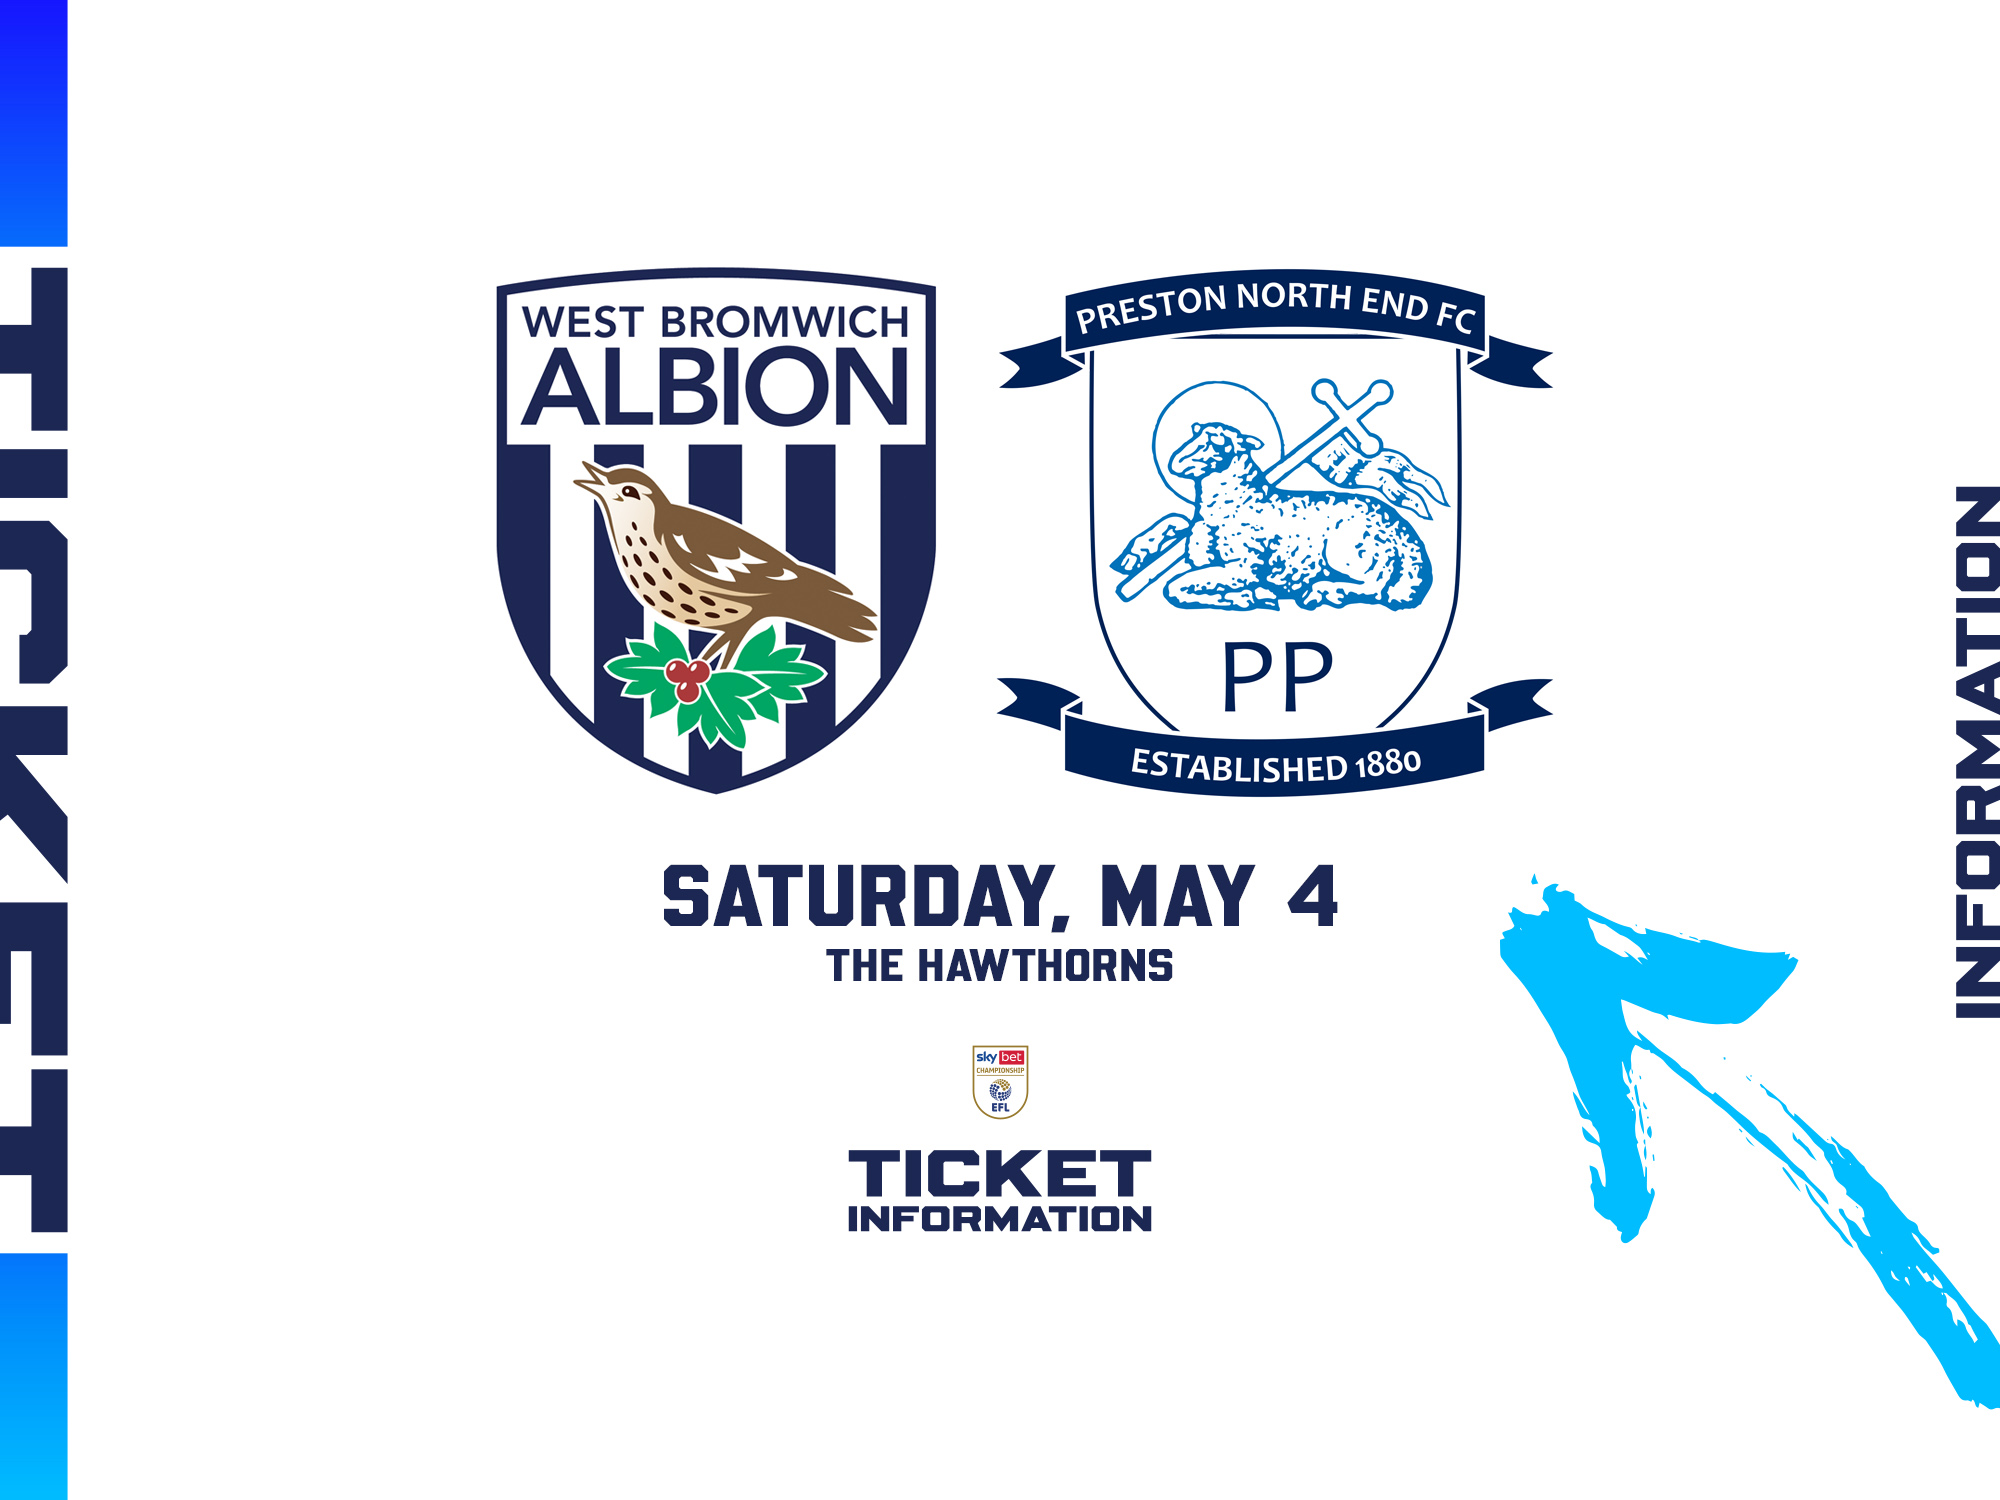 A ticket graphic displaying information for Albion's game against Preston